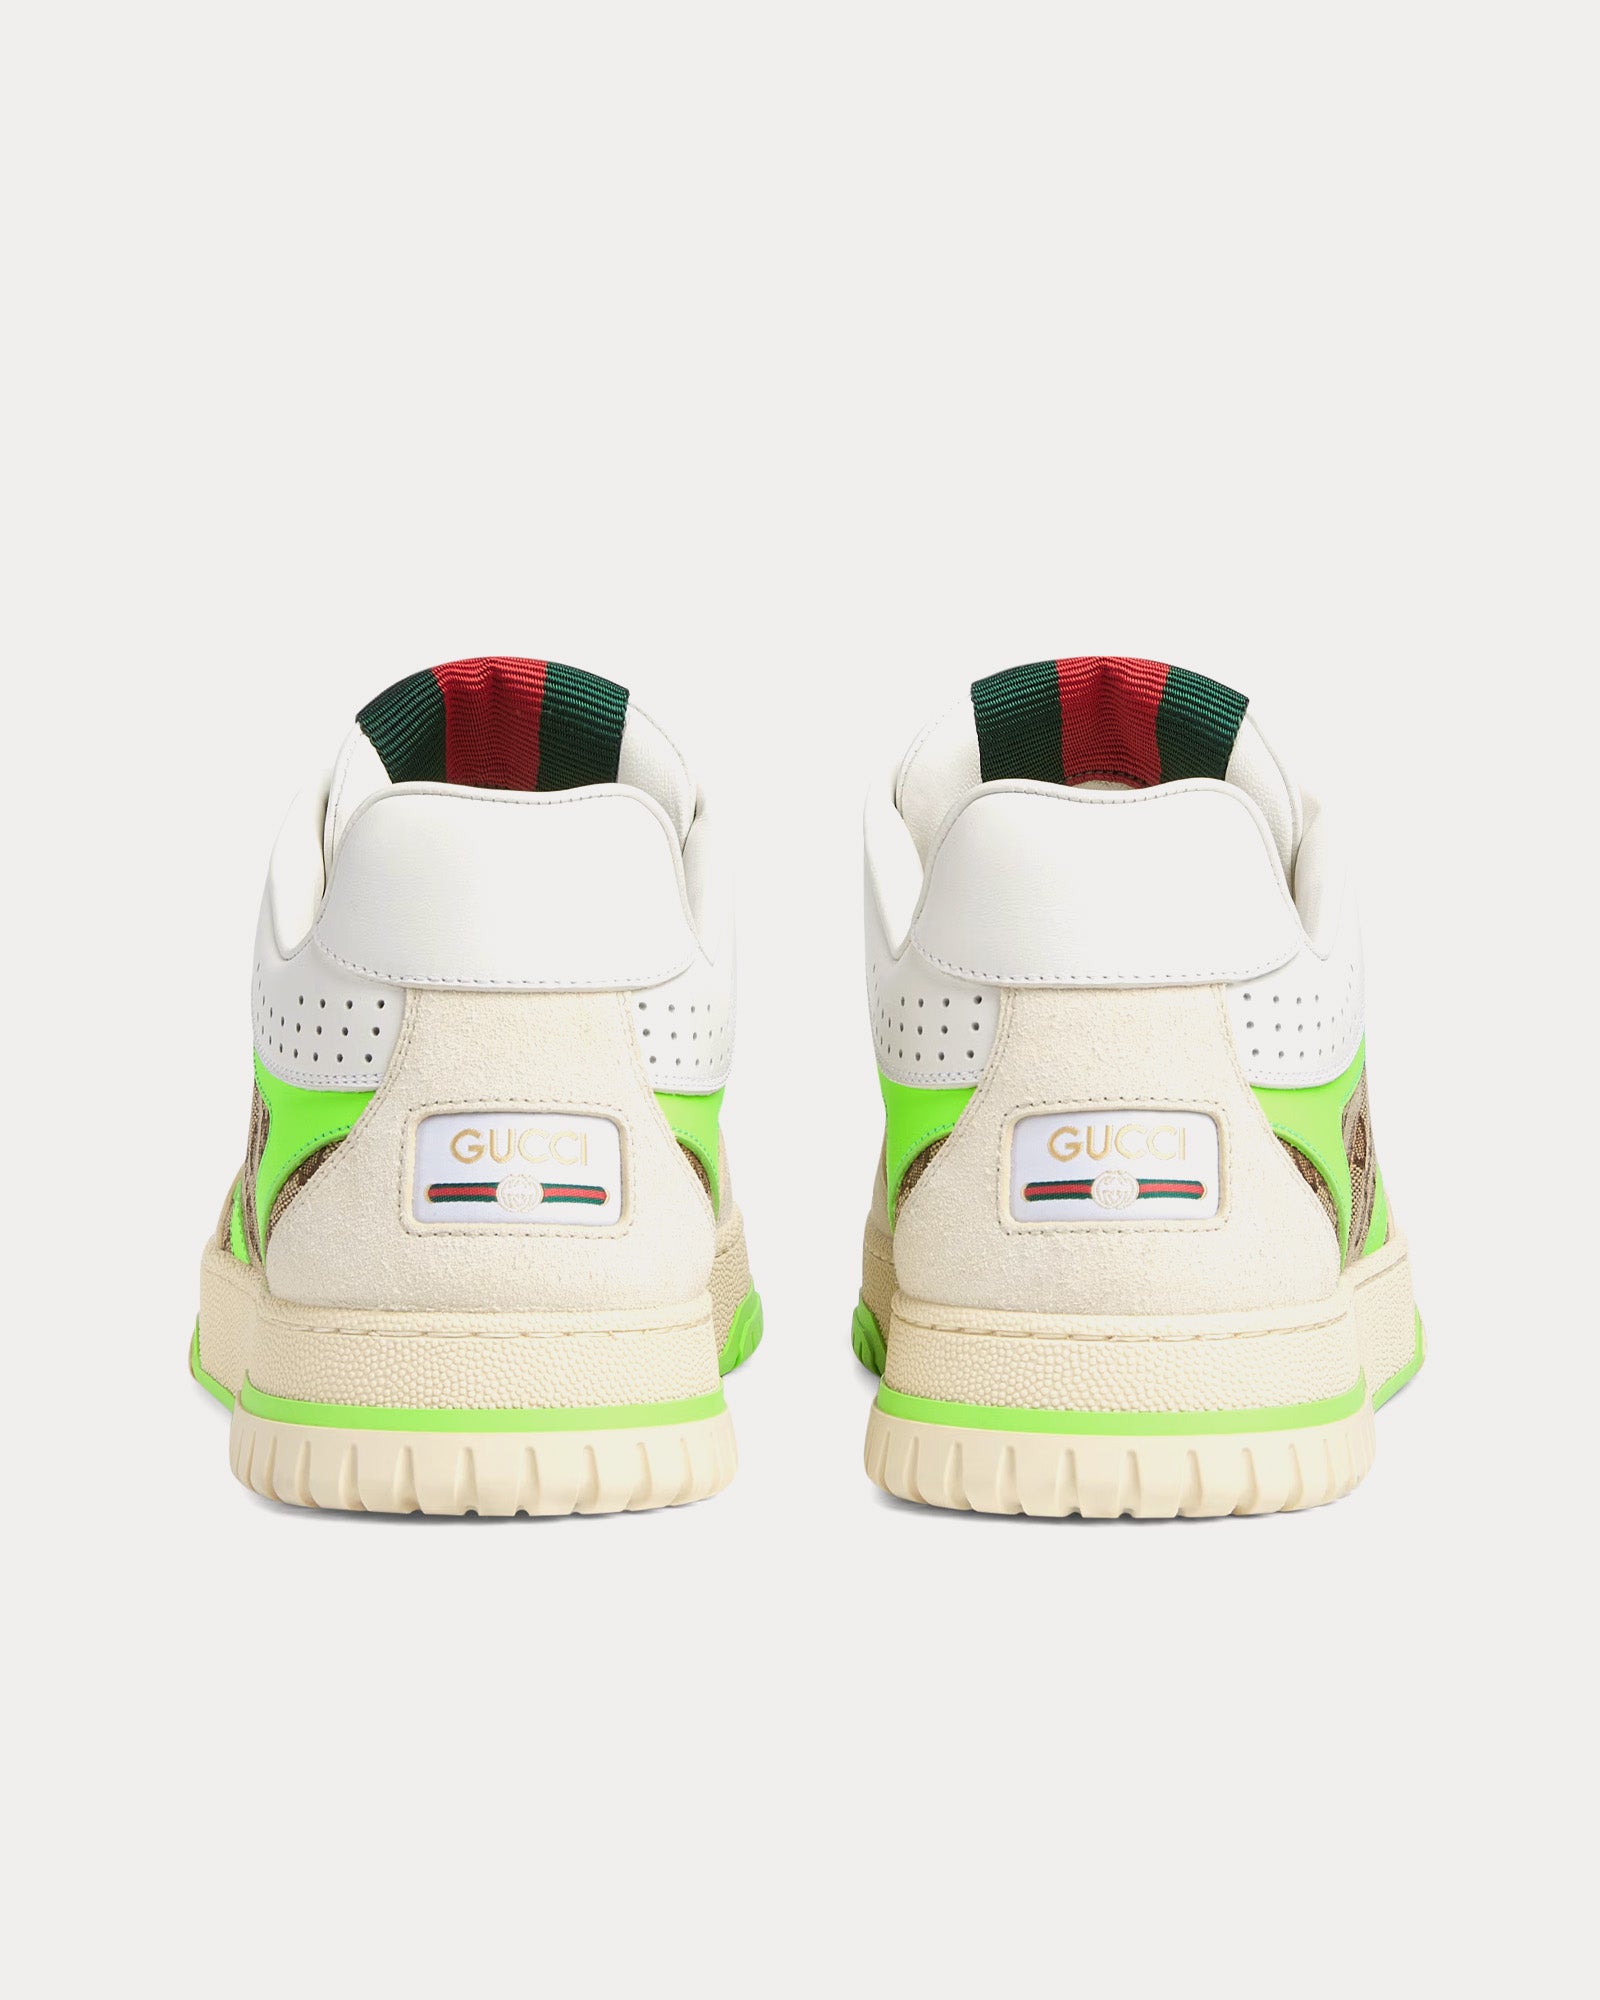 Gucci - Re-Web Leather with Original GG Canvas White / Green Low Top Sneakers